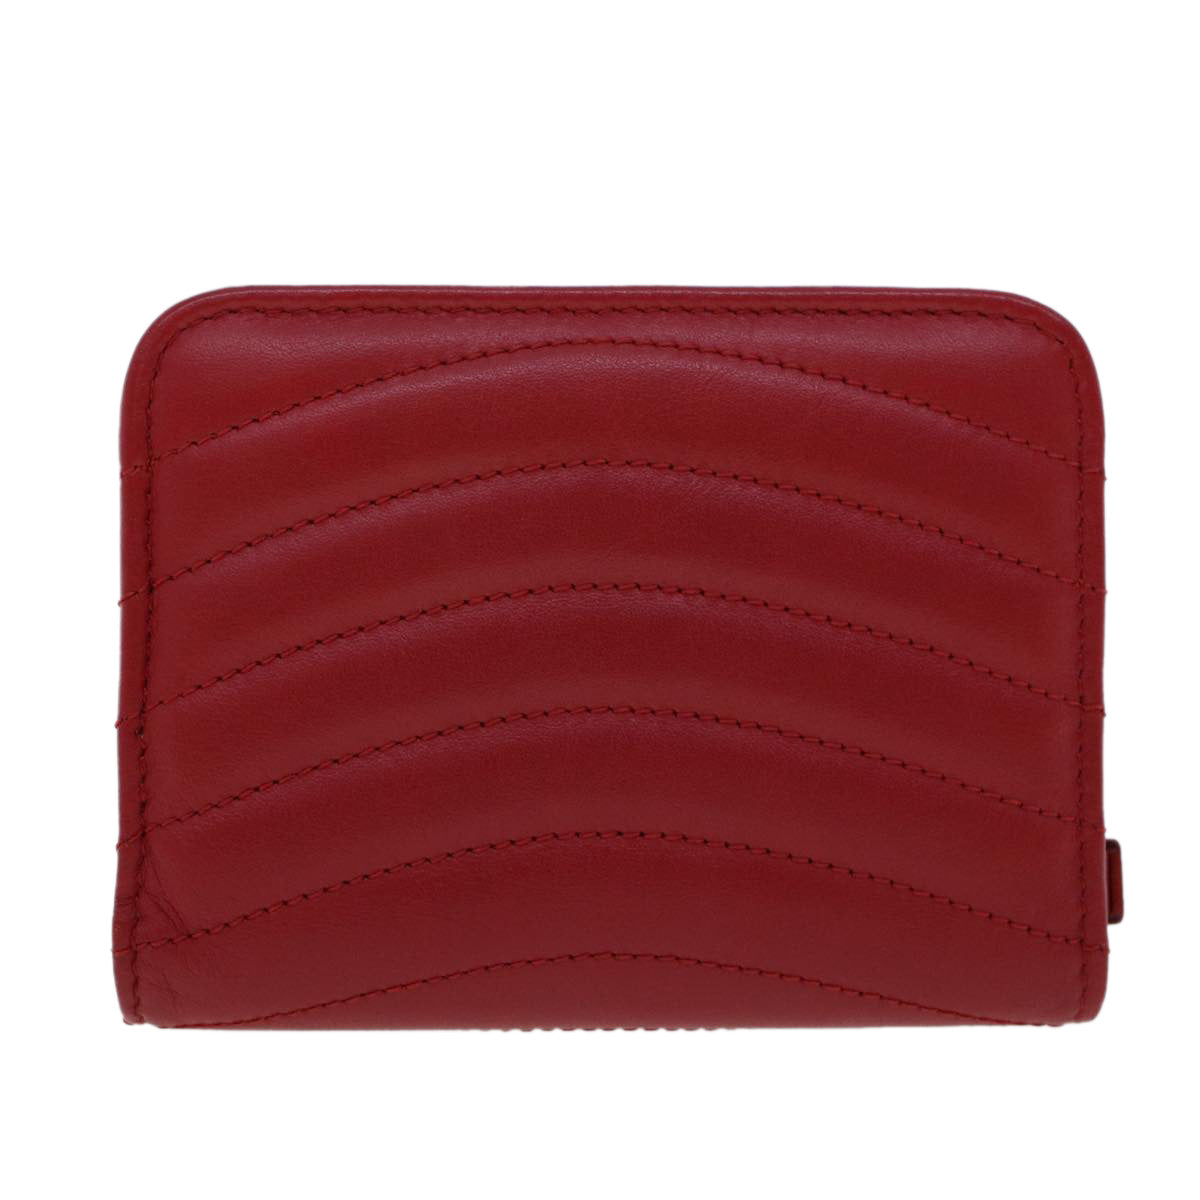 LOUIS VUITTON New Wave Zipto Compact Wallet Wallet Red M63790 LV Auth 45674 - 0